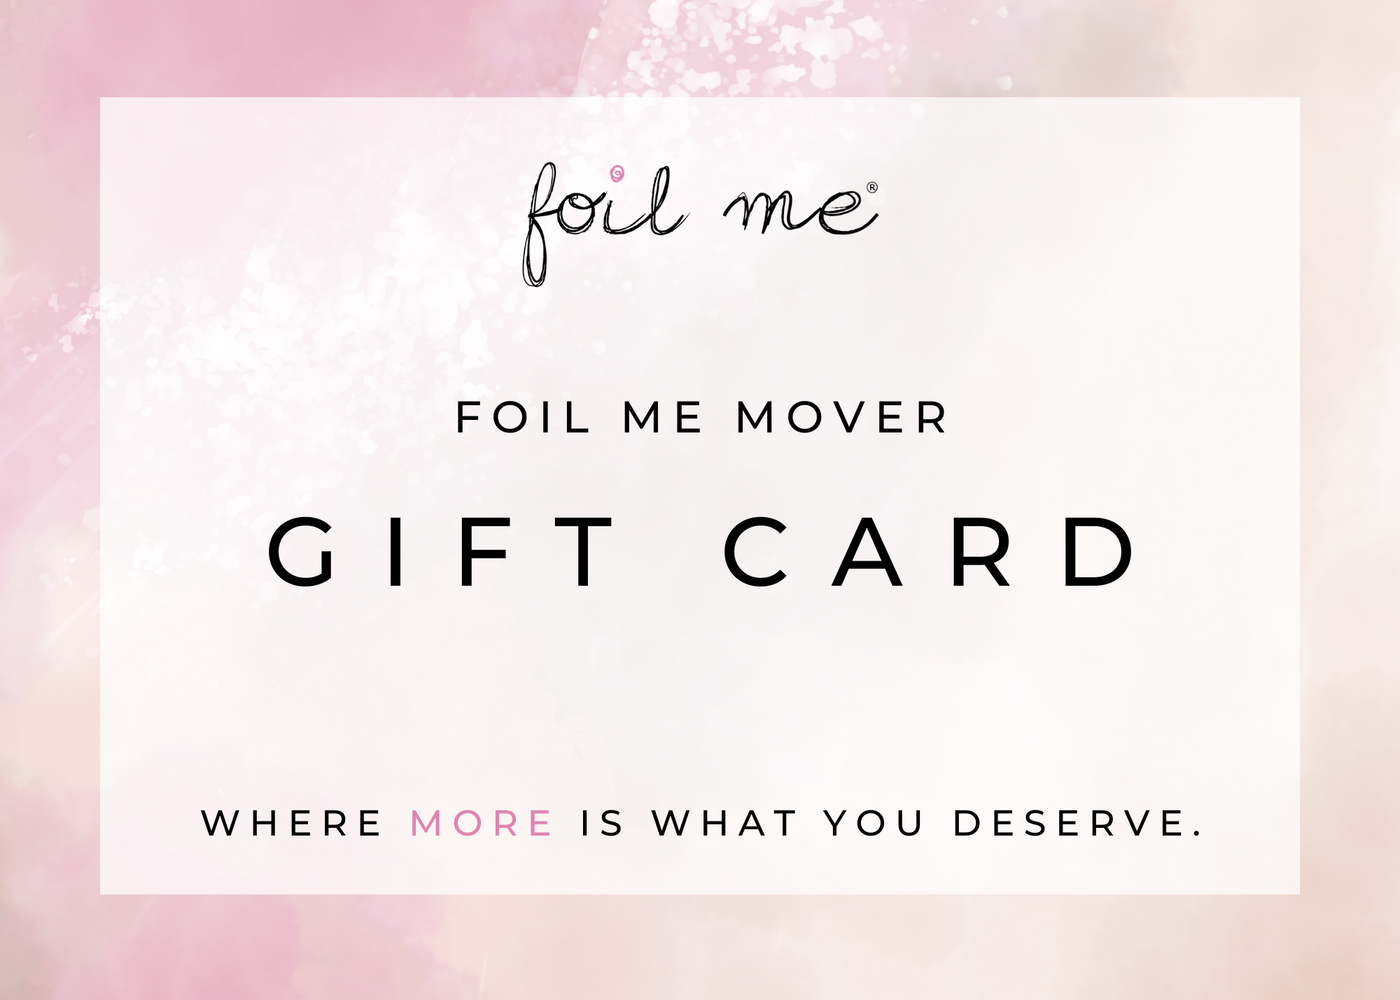 Foil Me Gift Card - For Foil Me Movers